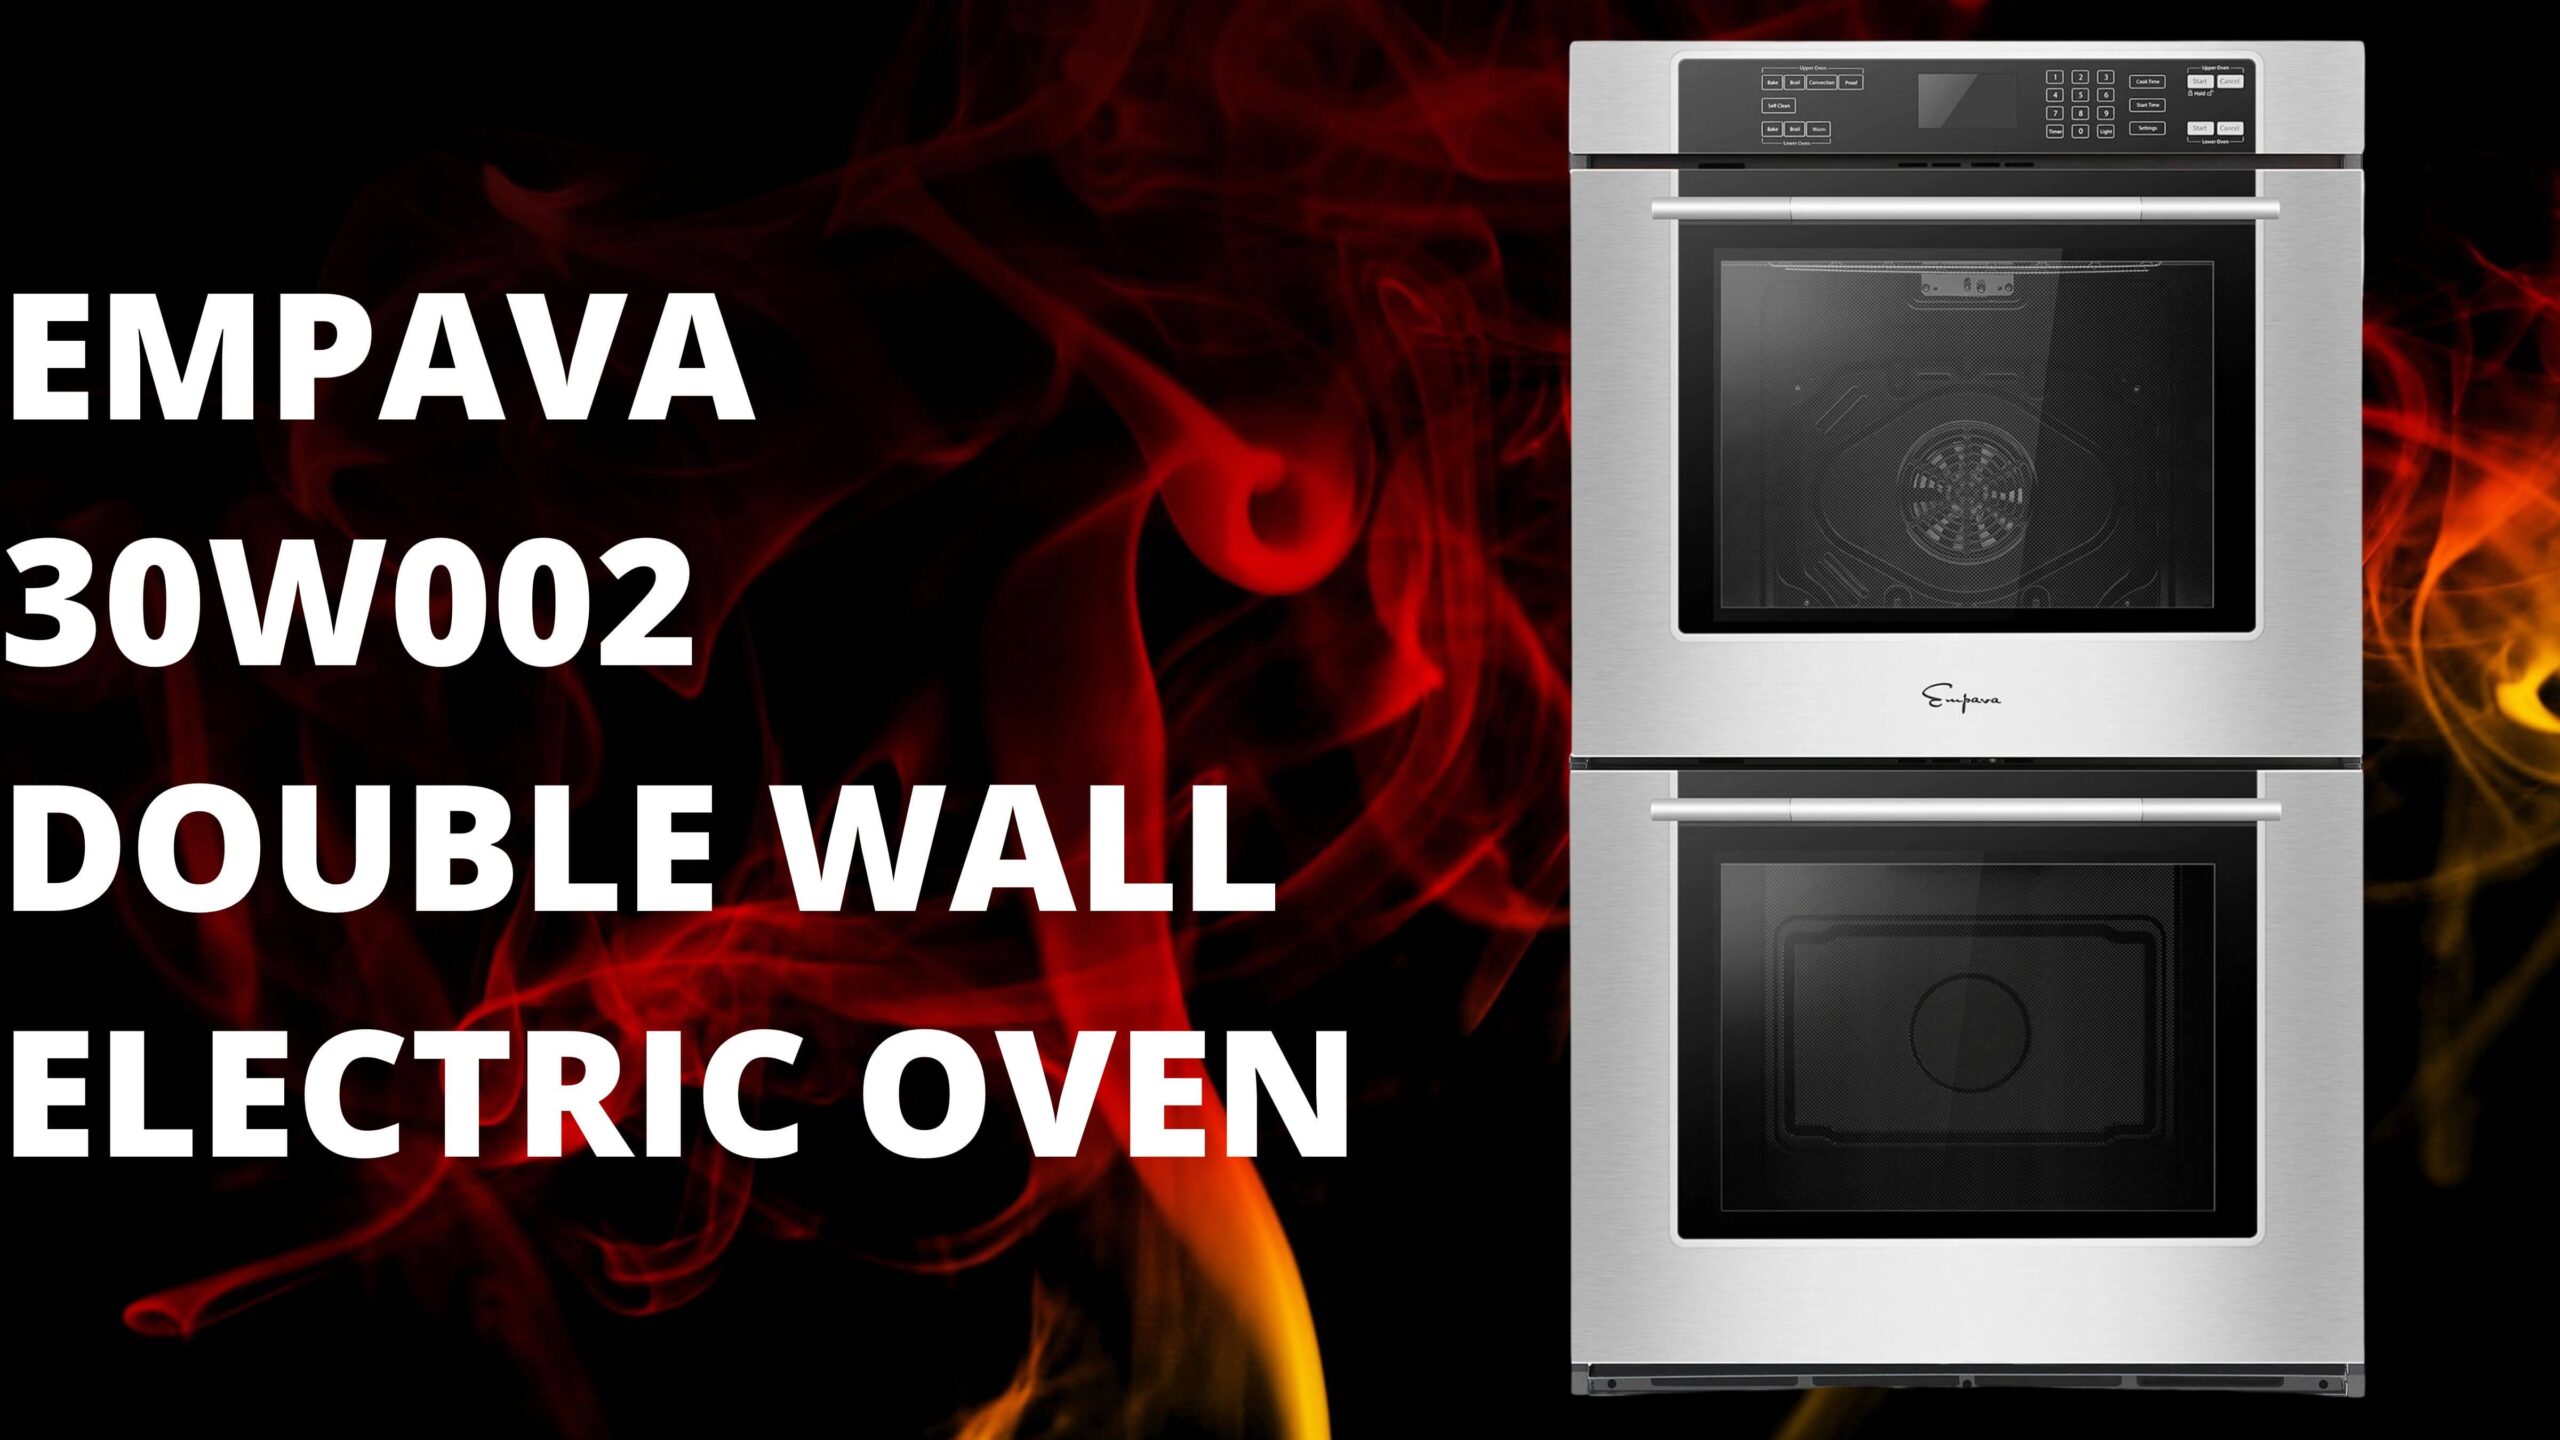 empava 30w002 double wall oven with flames in bakground